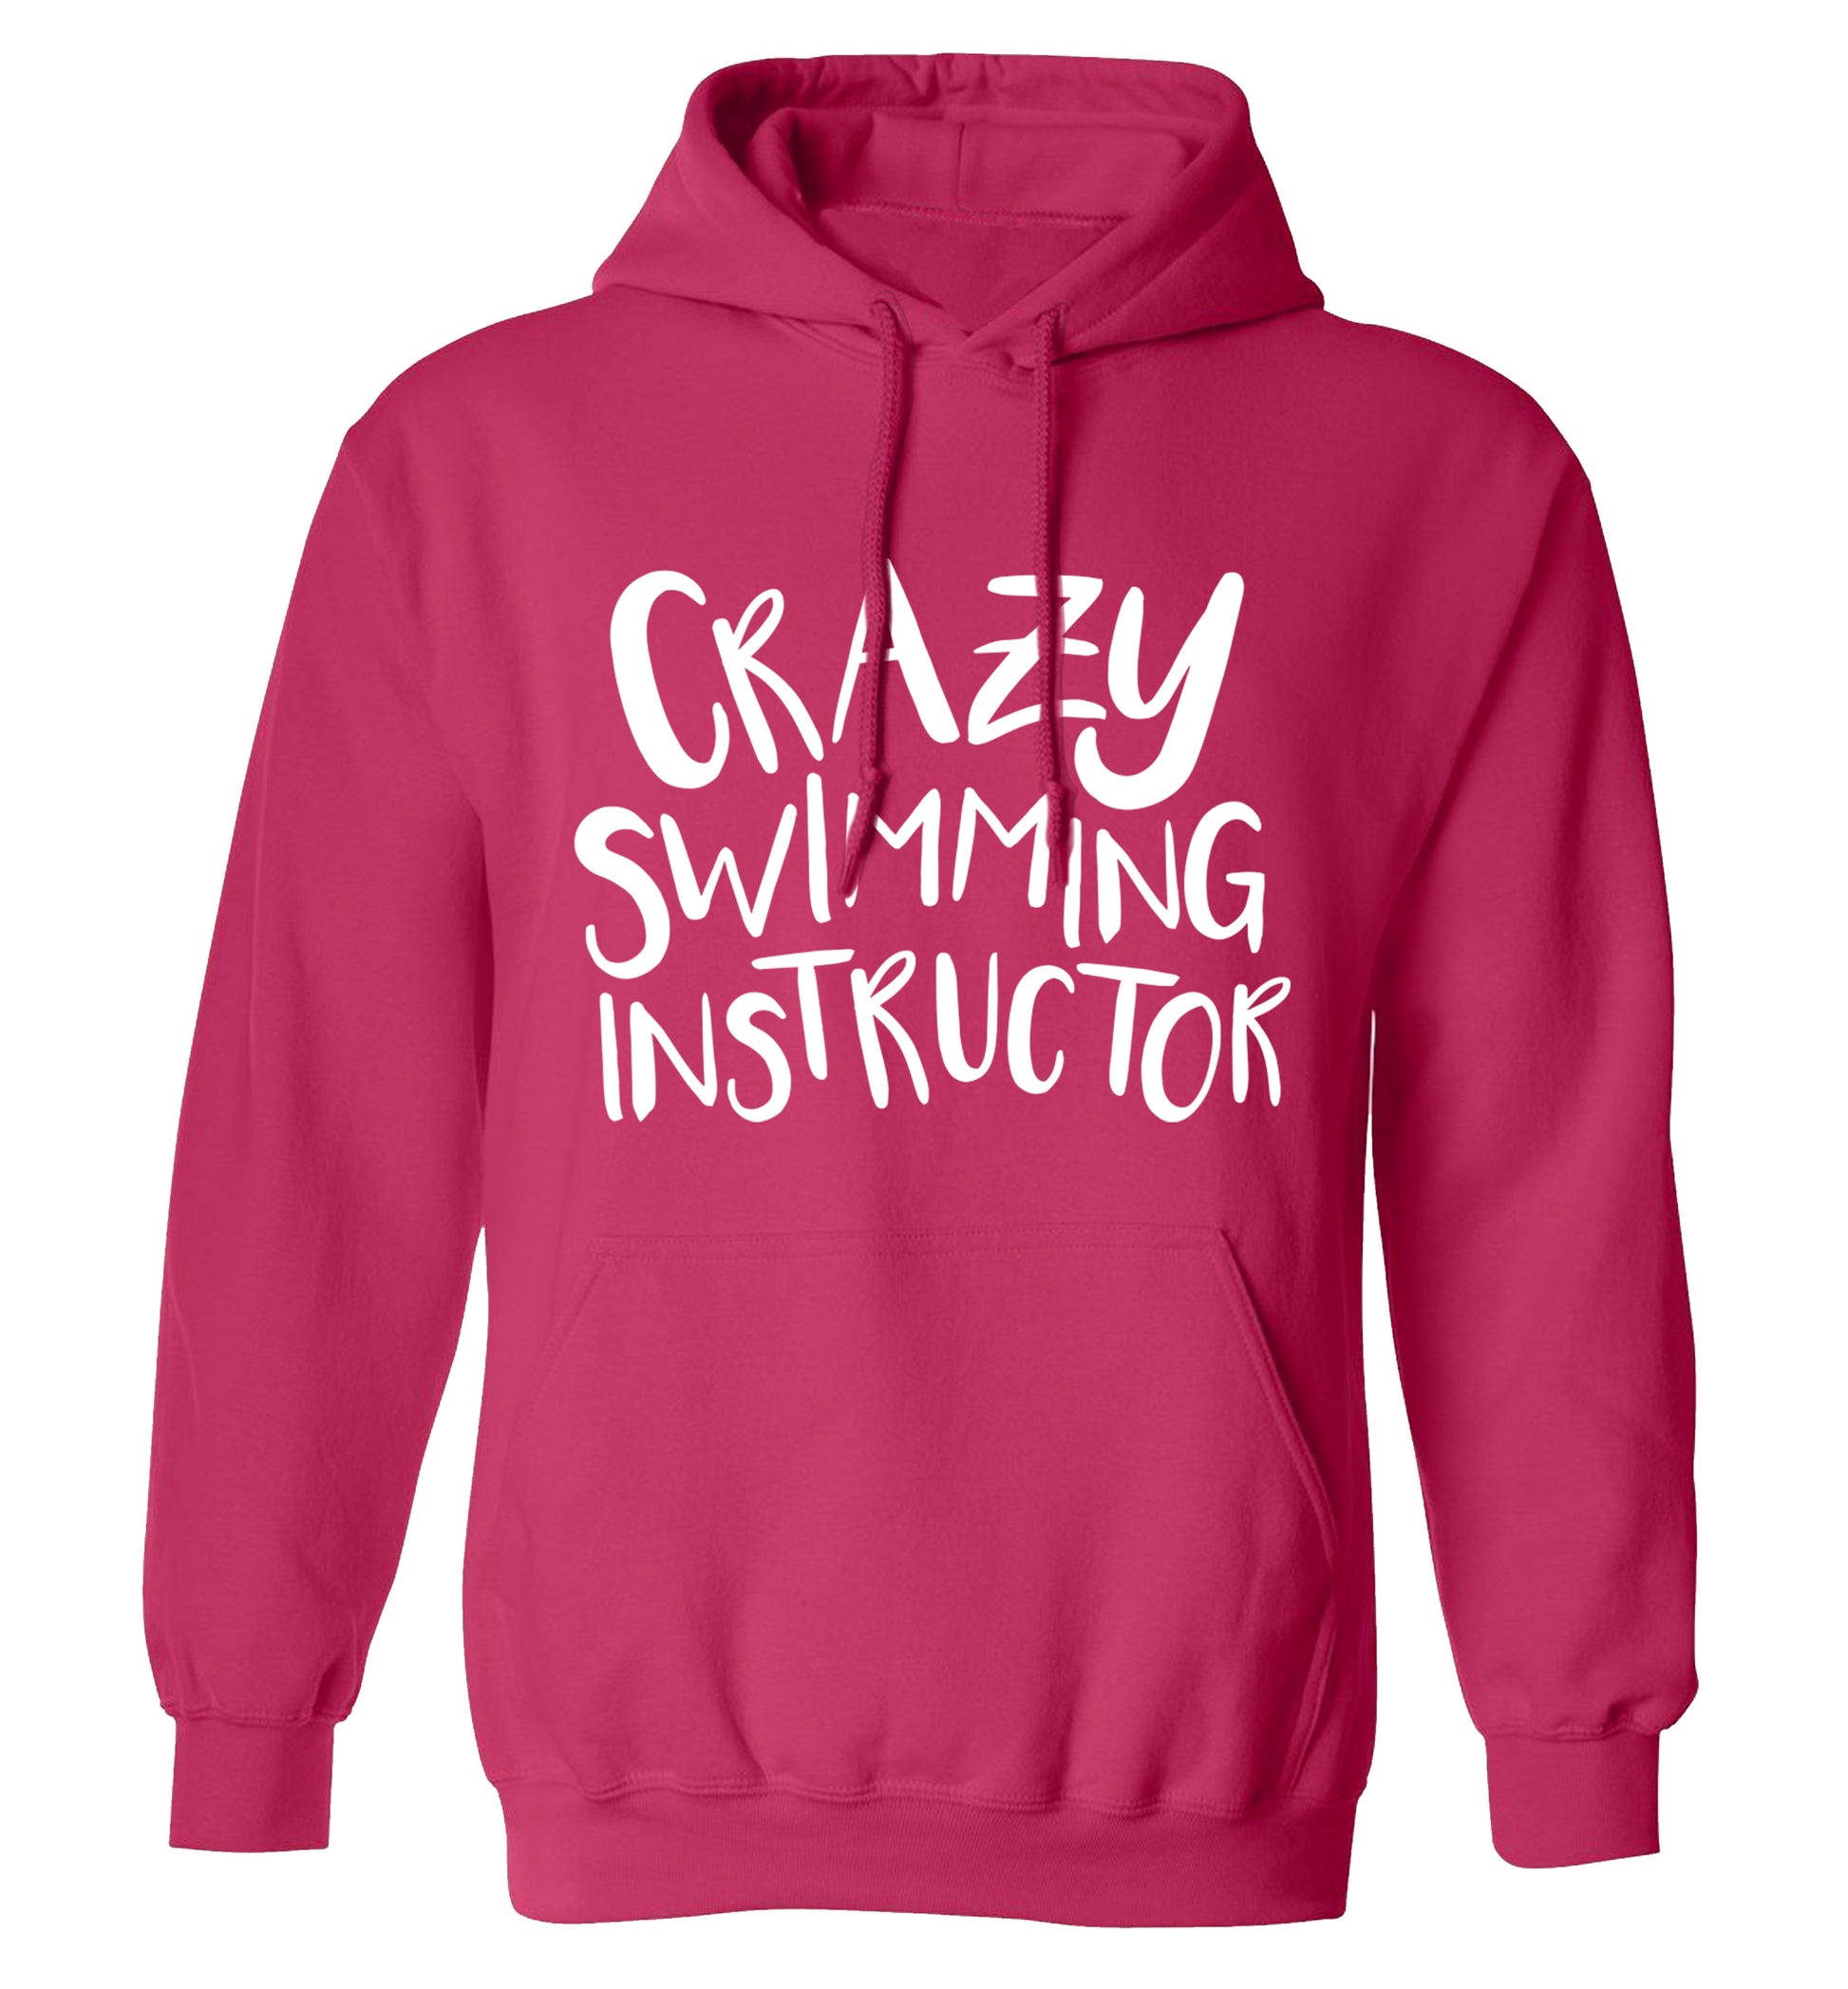 Crazy swimming instructor adults unisex pink hoodie 2XL